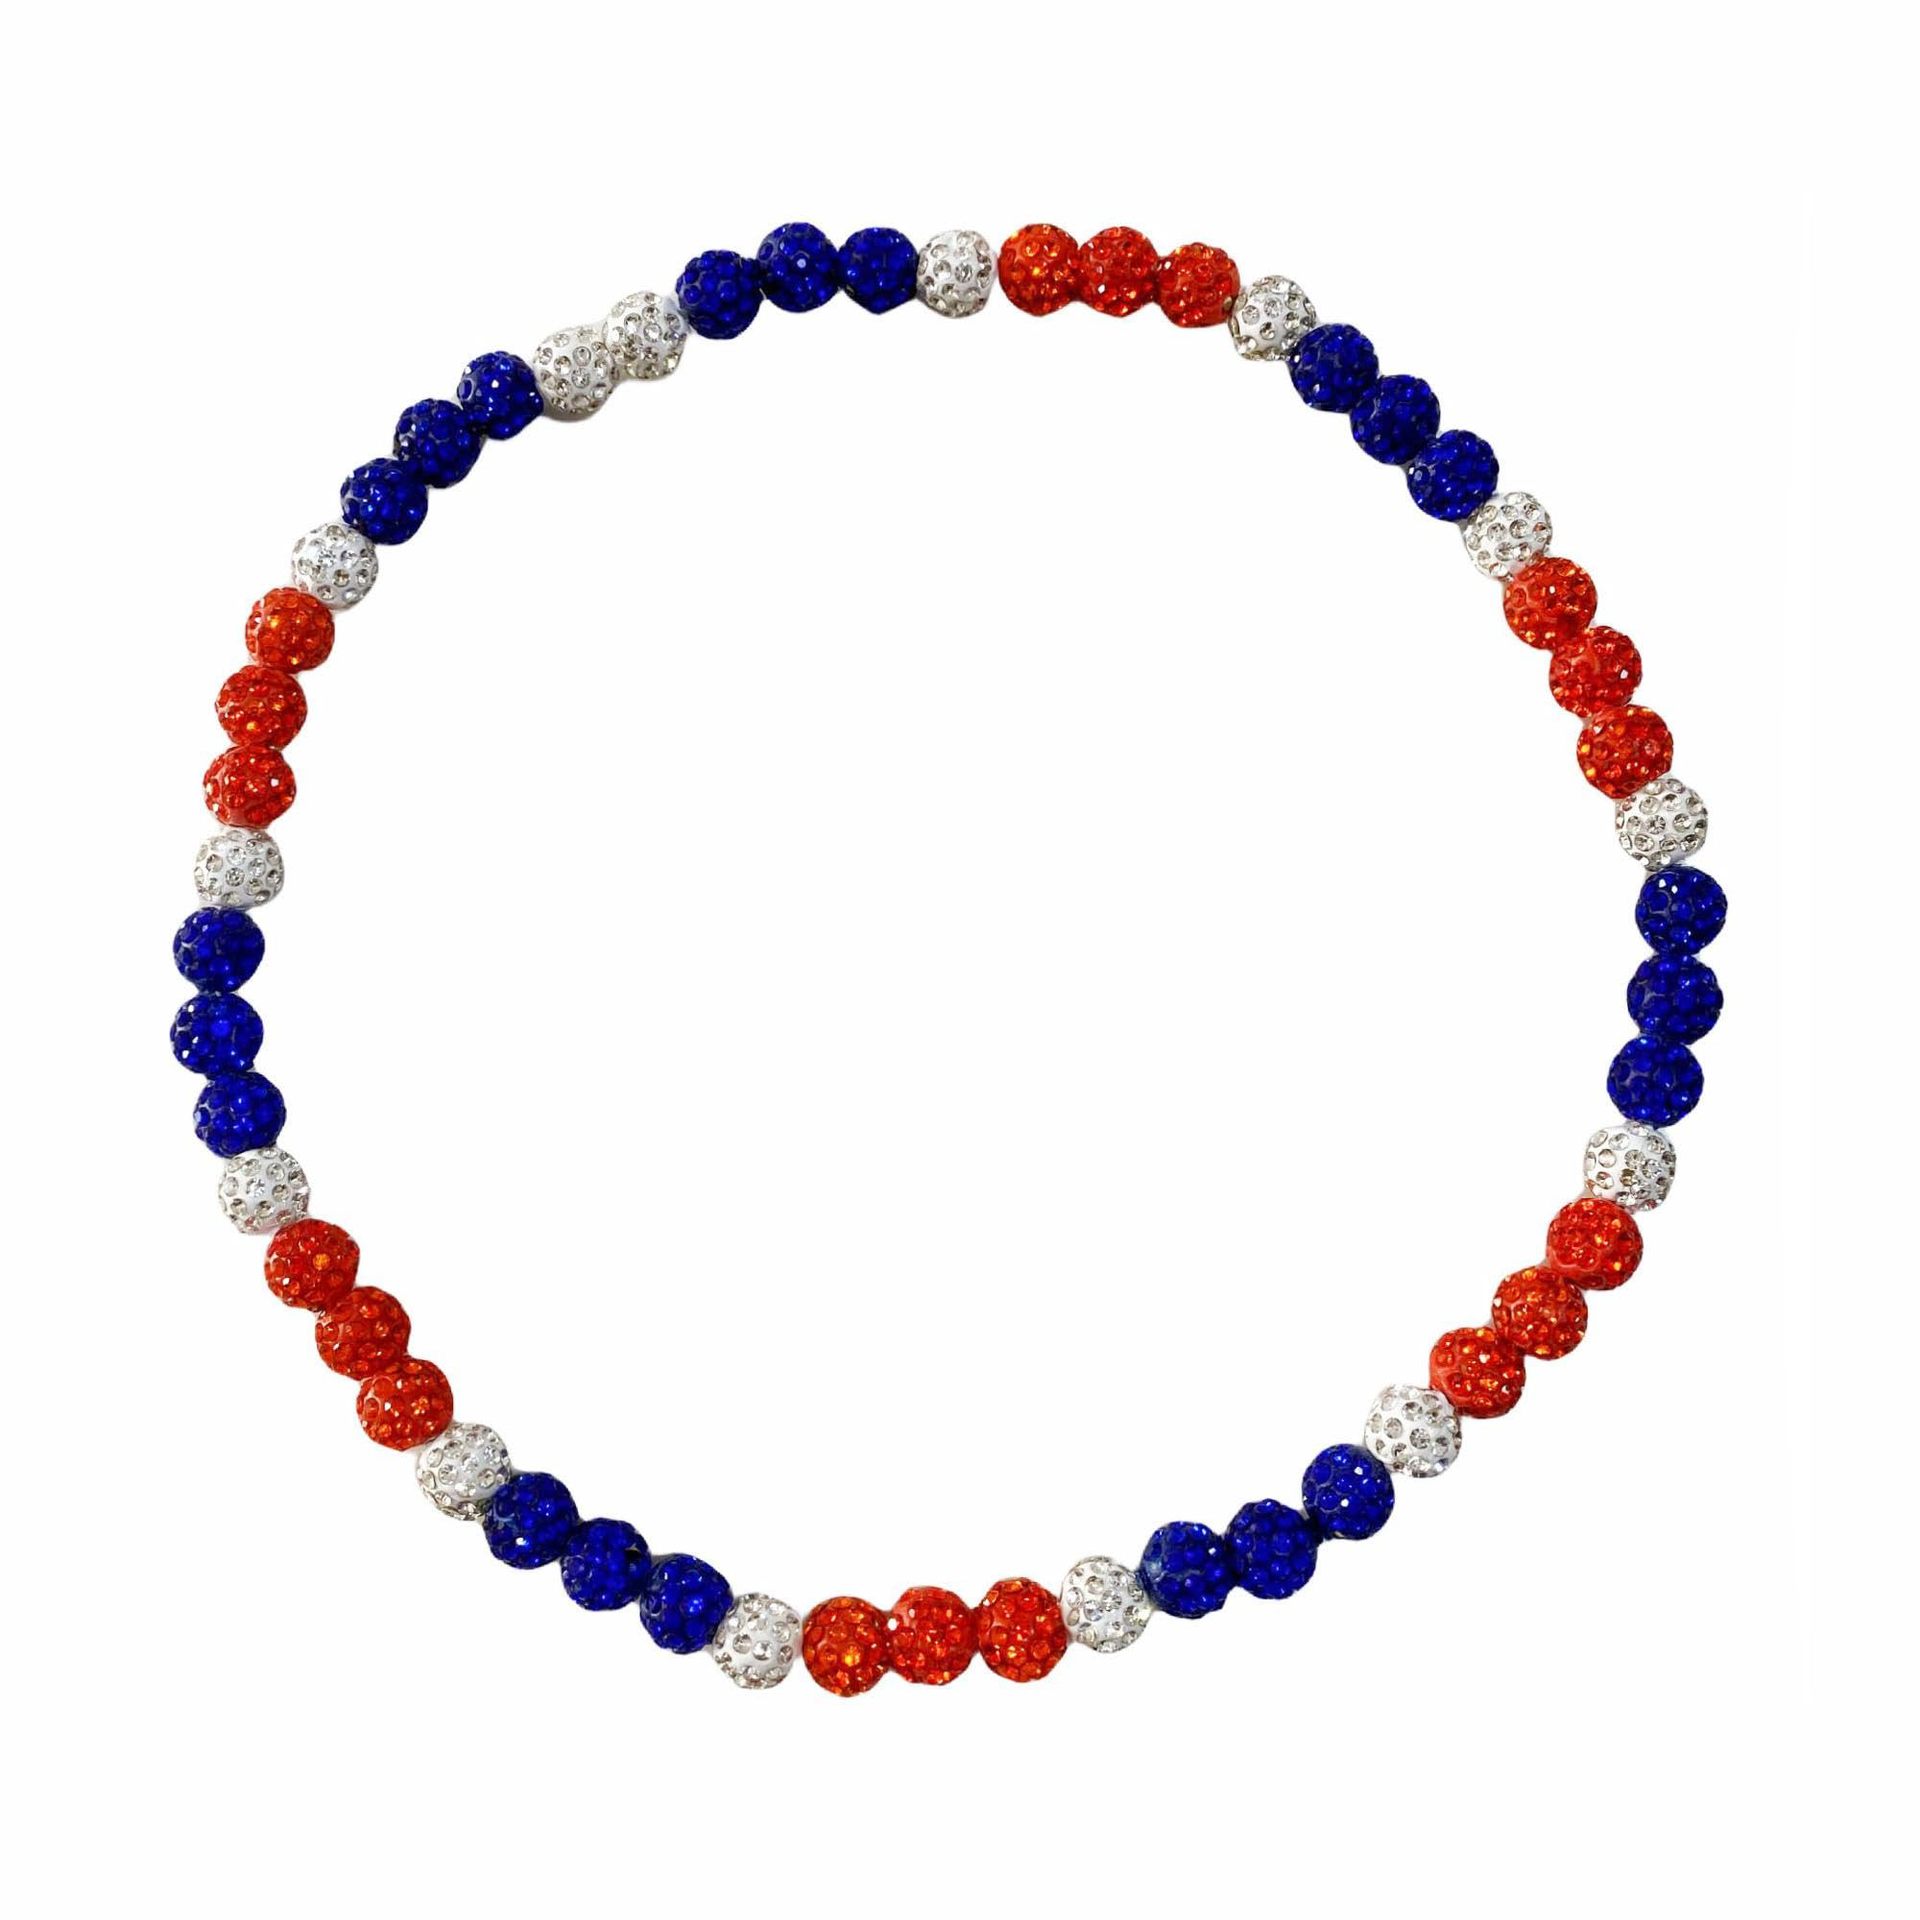 10mm red, white and blue diamond